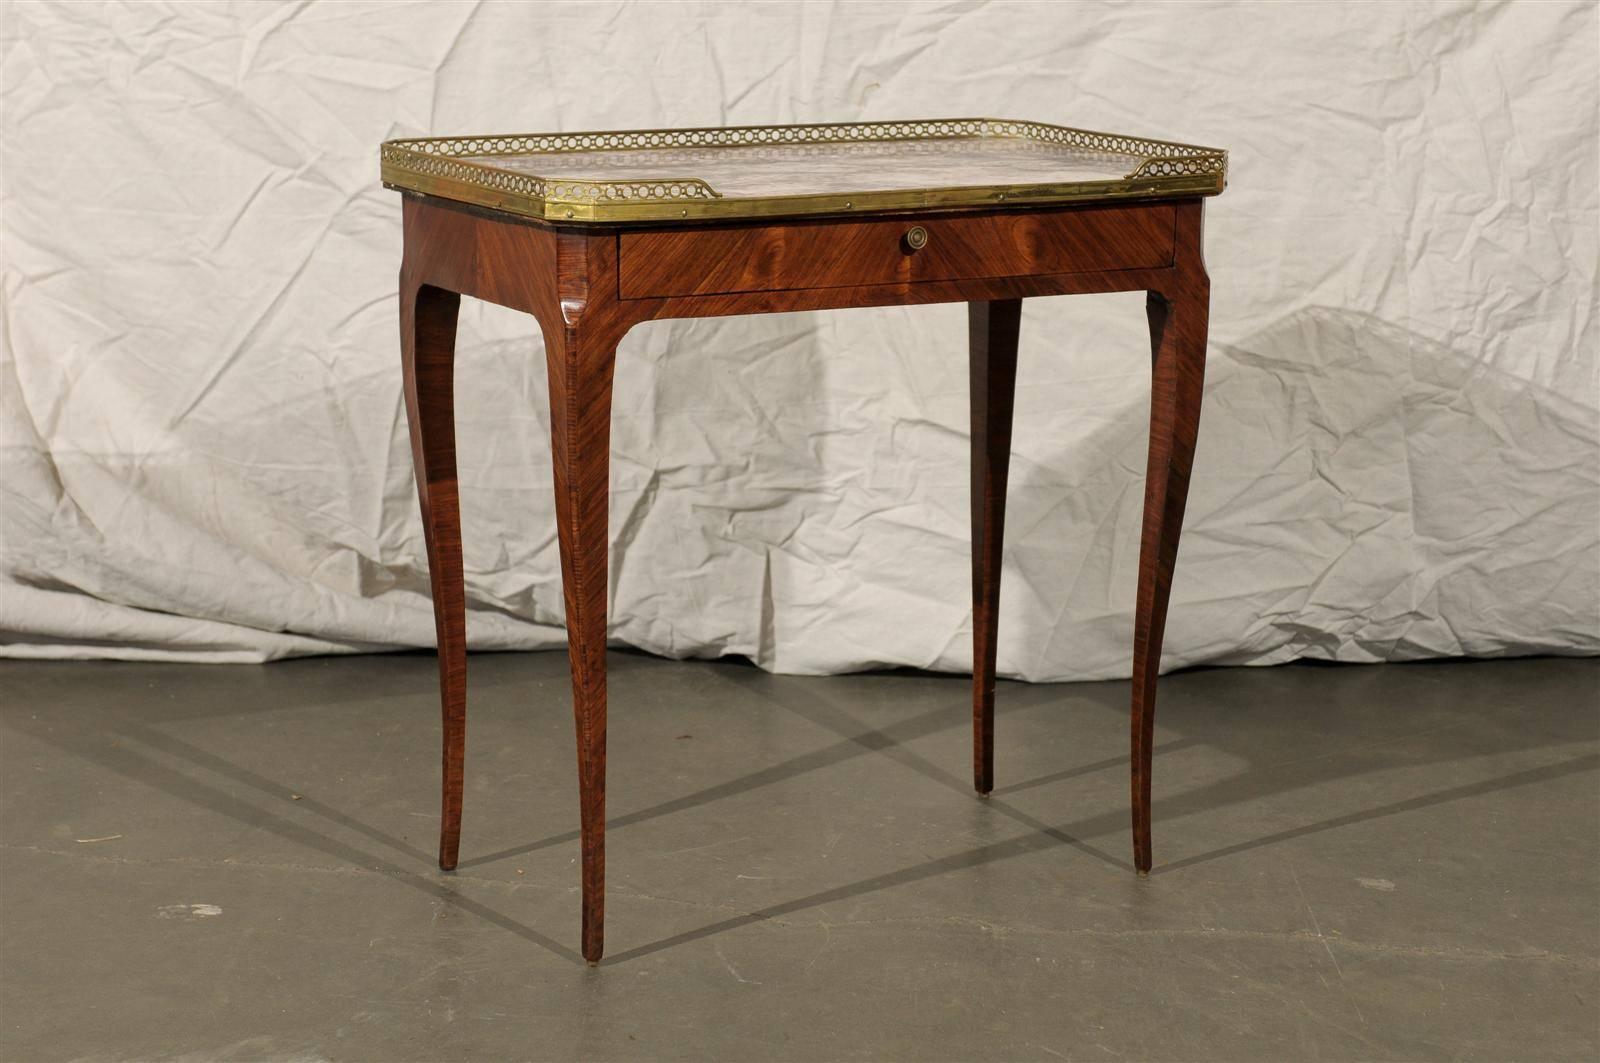 20th century Louis XV style marble-top kingswood table with brass gallery.